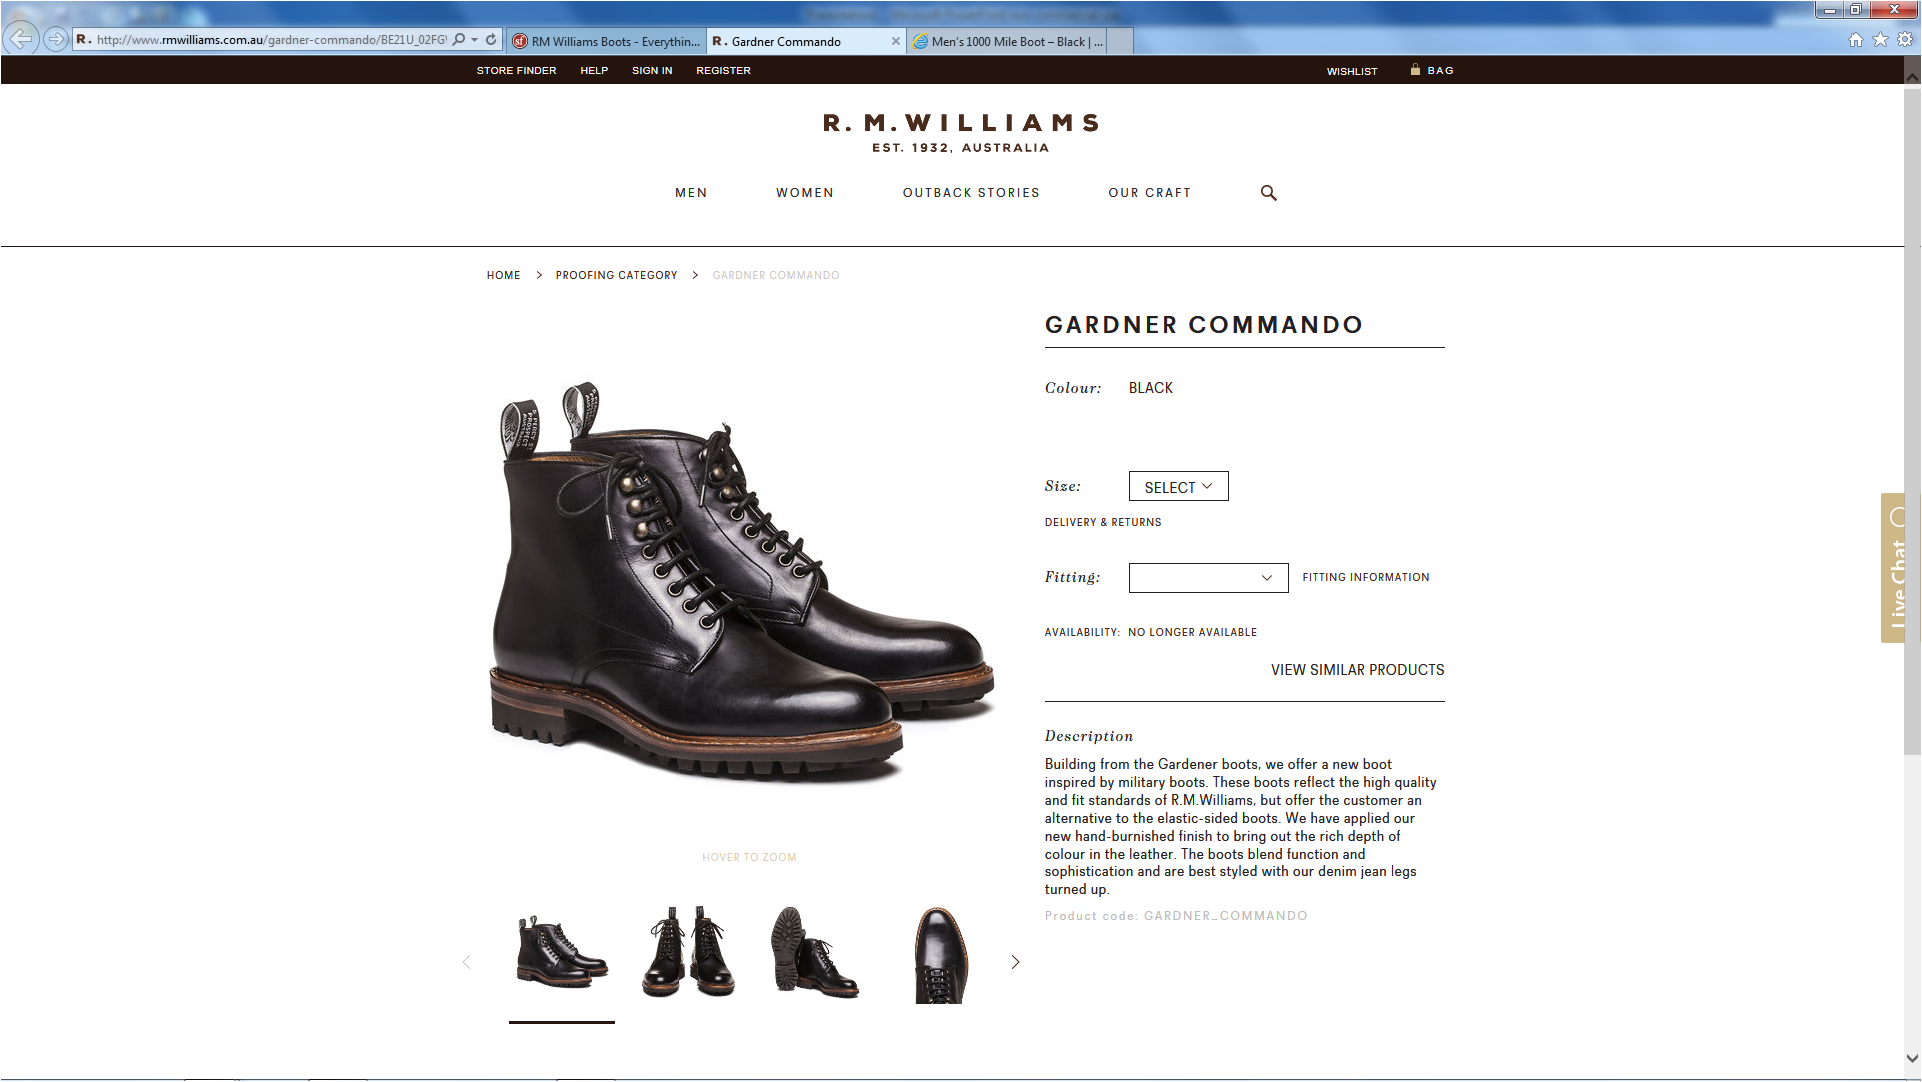 RM Williams Boots - Everything You Wanted to Know